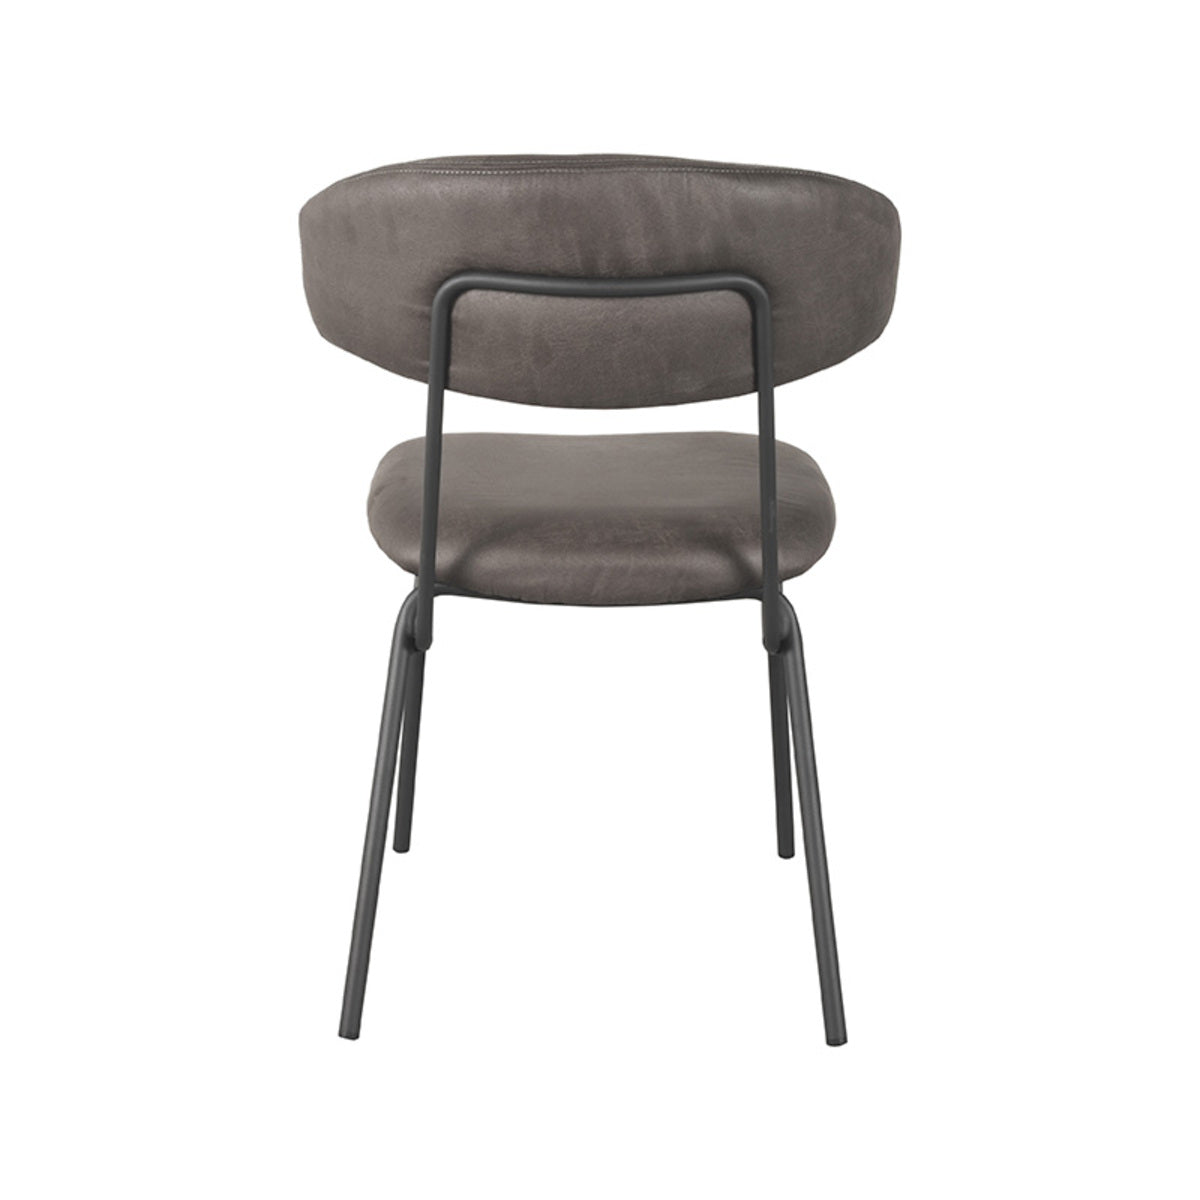 LABEL51 Dining room chair Zack - Anthracite - Microfiber | 2 pieces